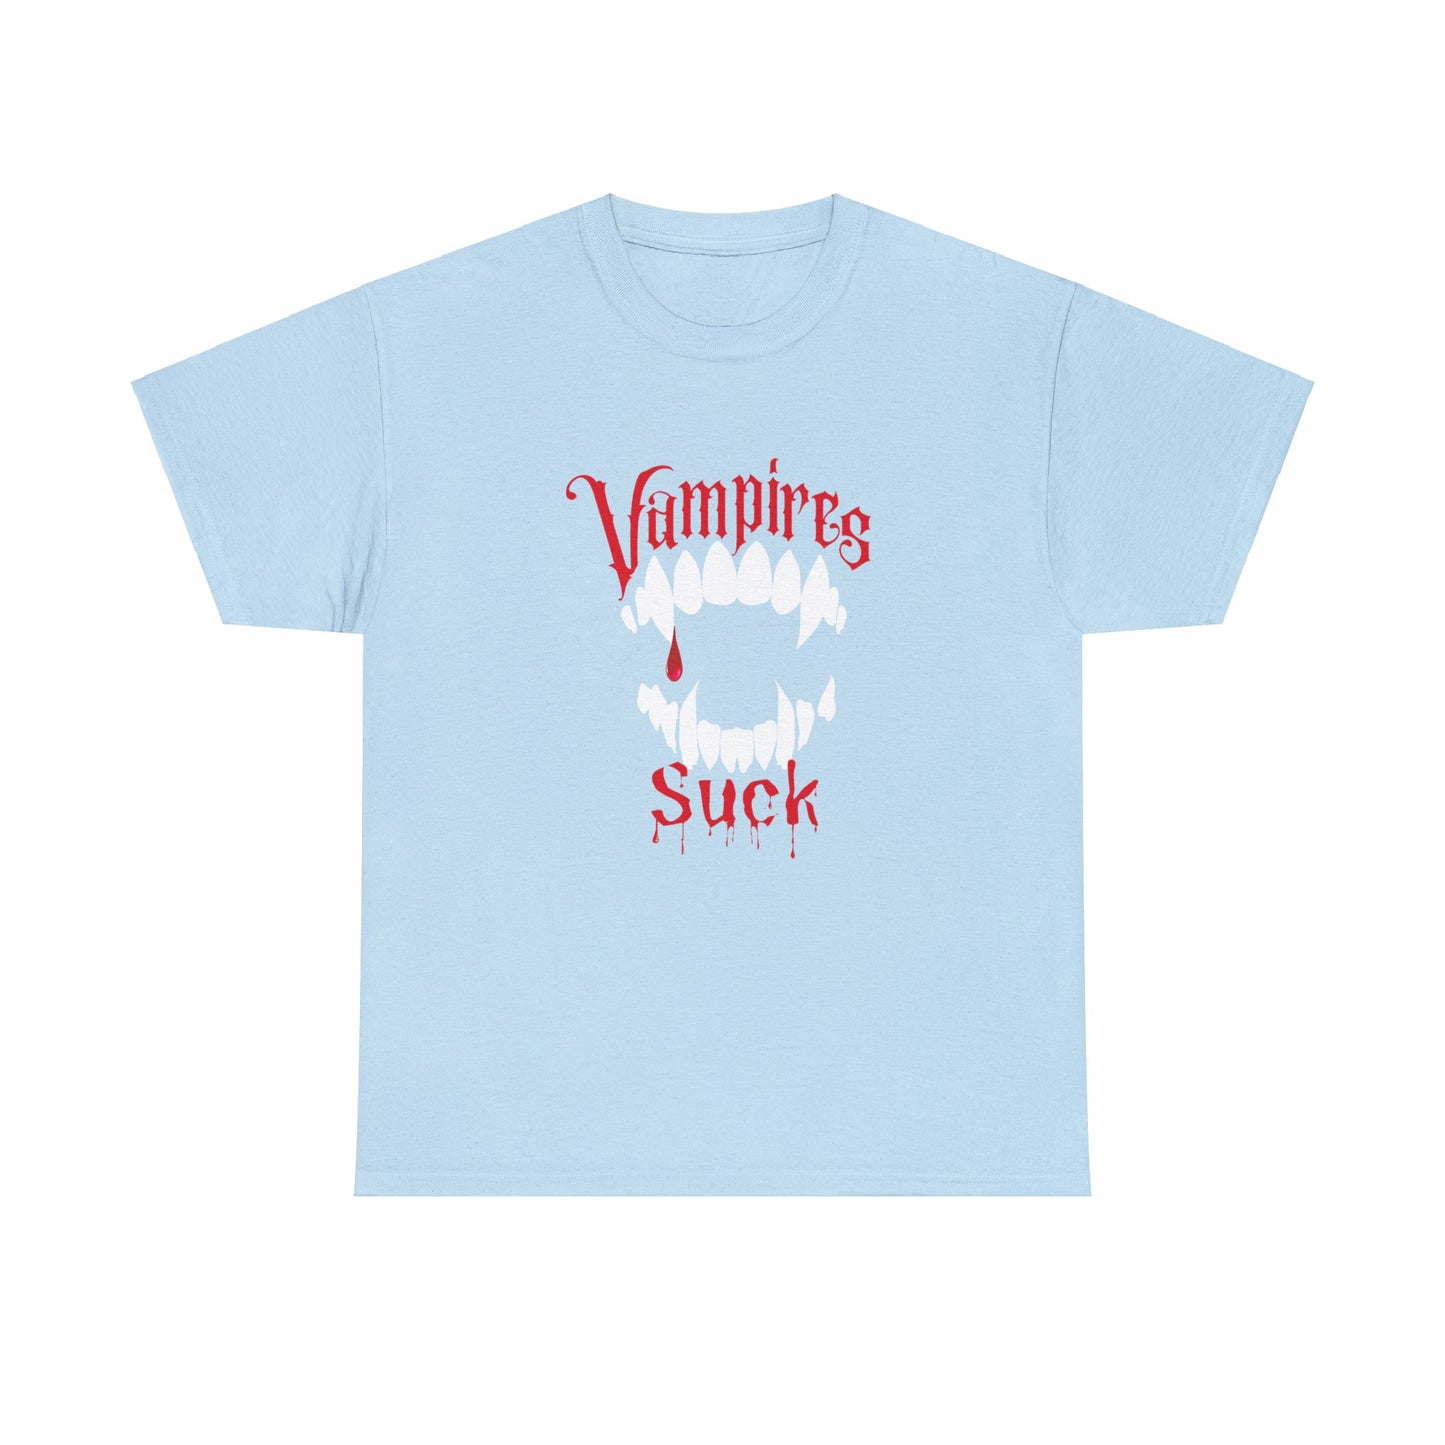 Vampires Suck T-Shirt, Funny Ironic Halloween Black Tee, Macabre, Ironic Spooky, White Vampire Fangs, Creepy Red Text, Dripping Blood